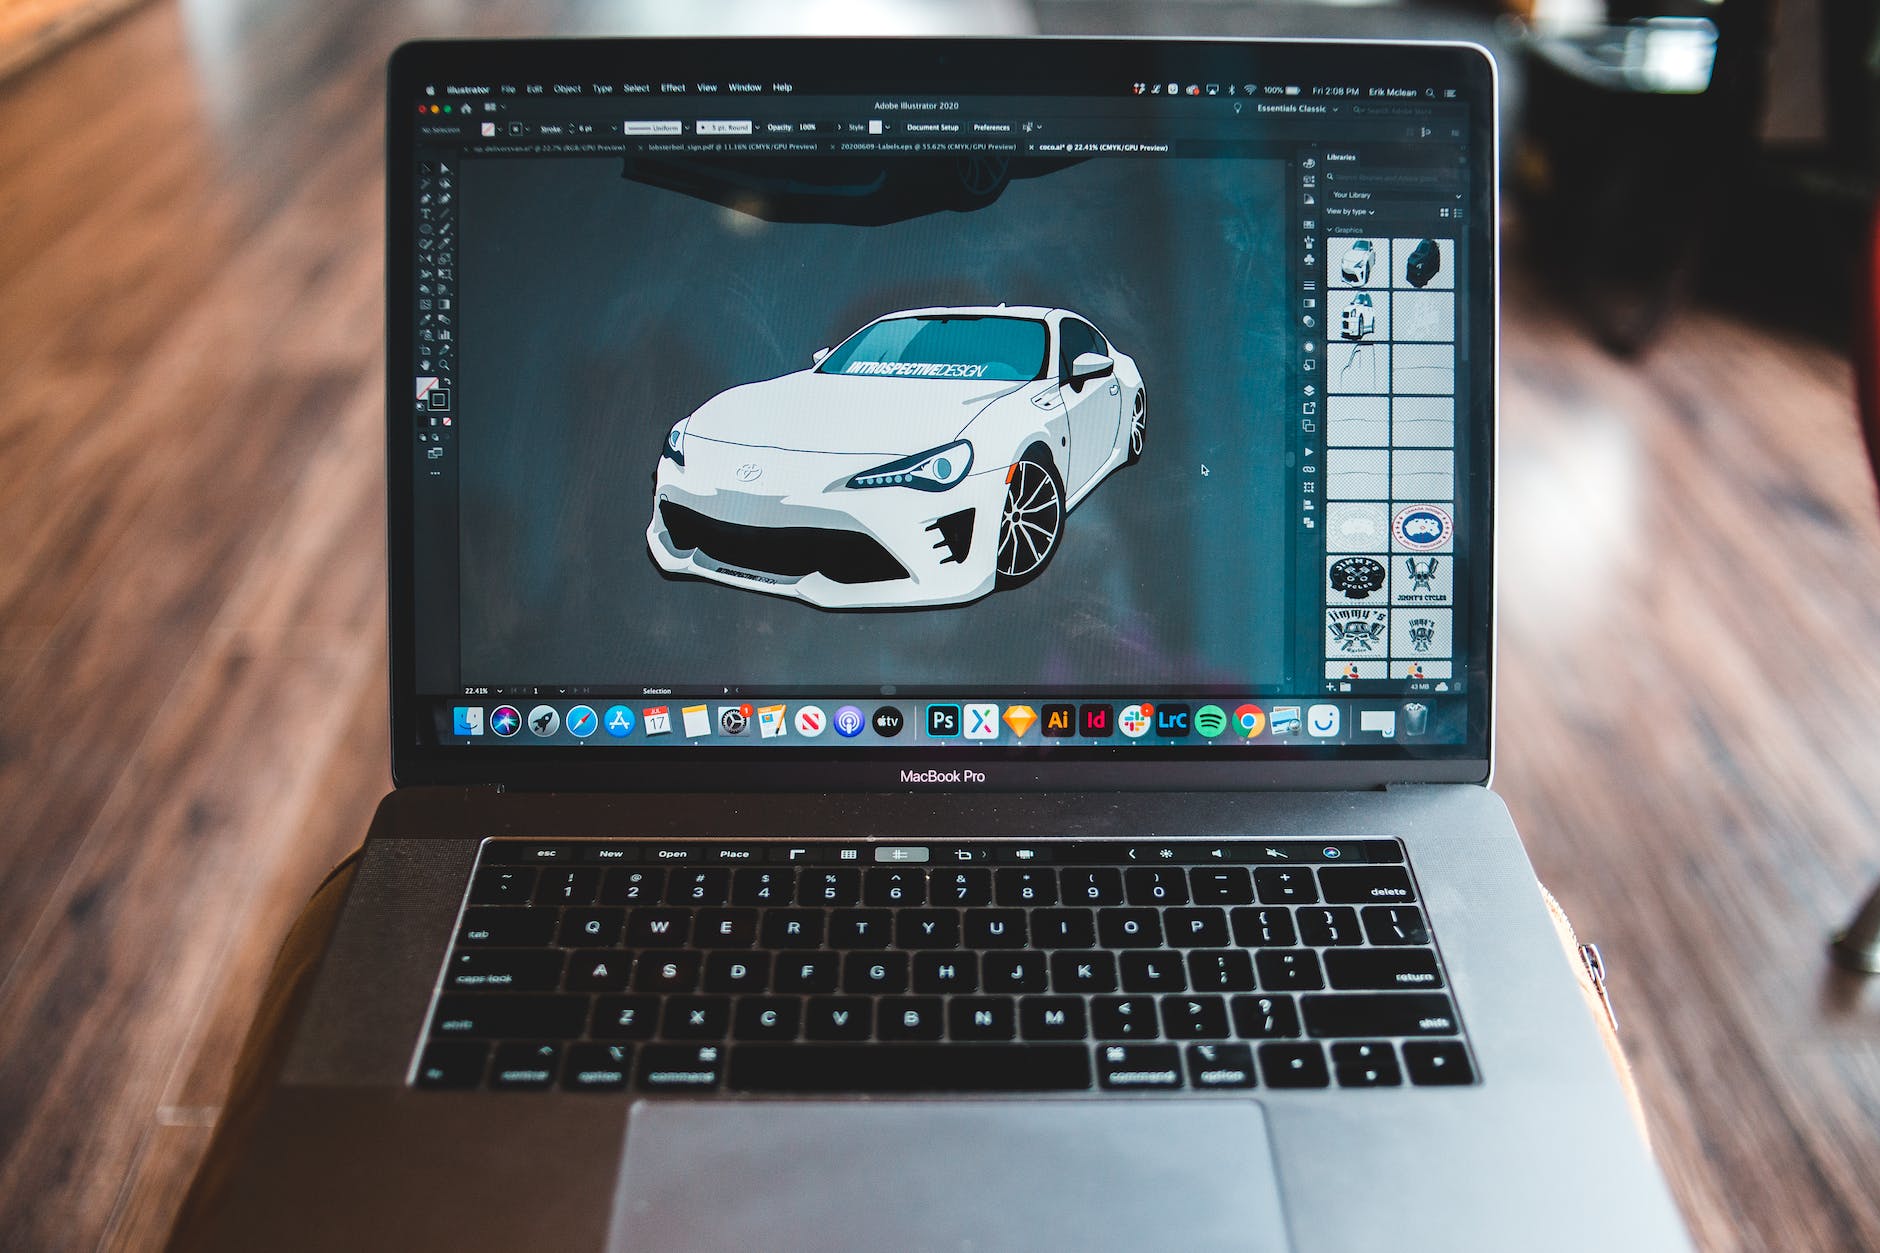 sports car image on screen